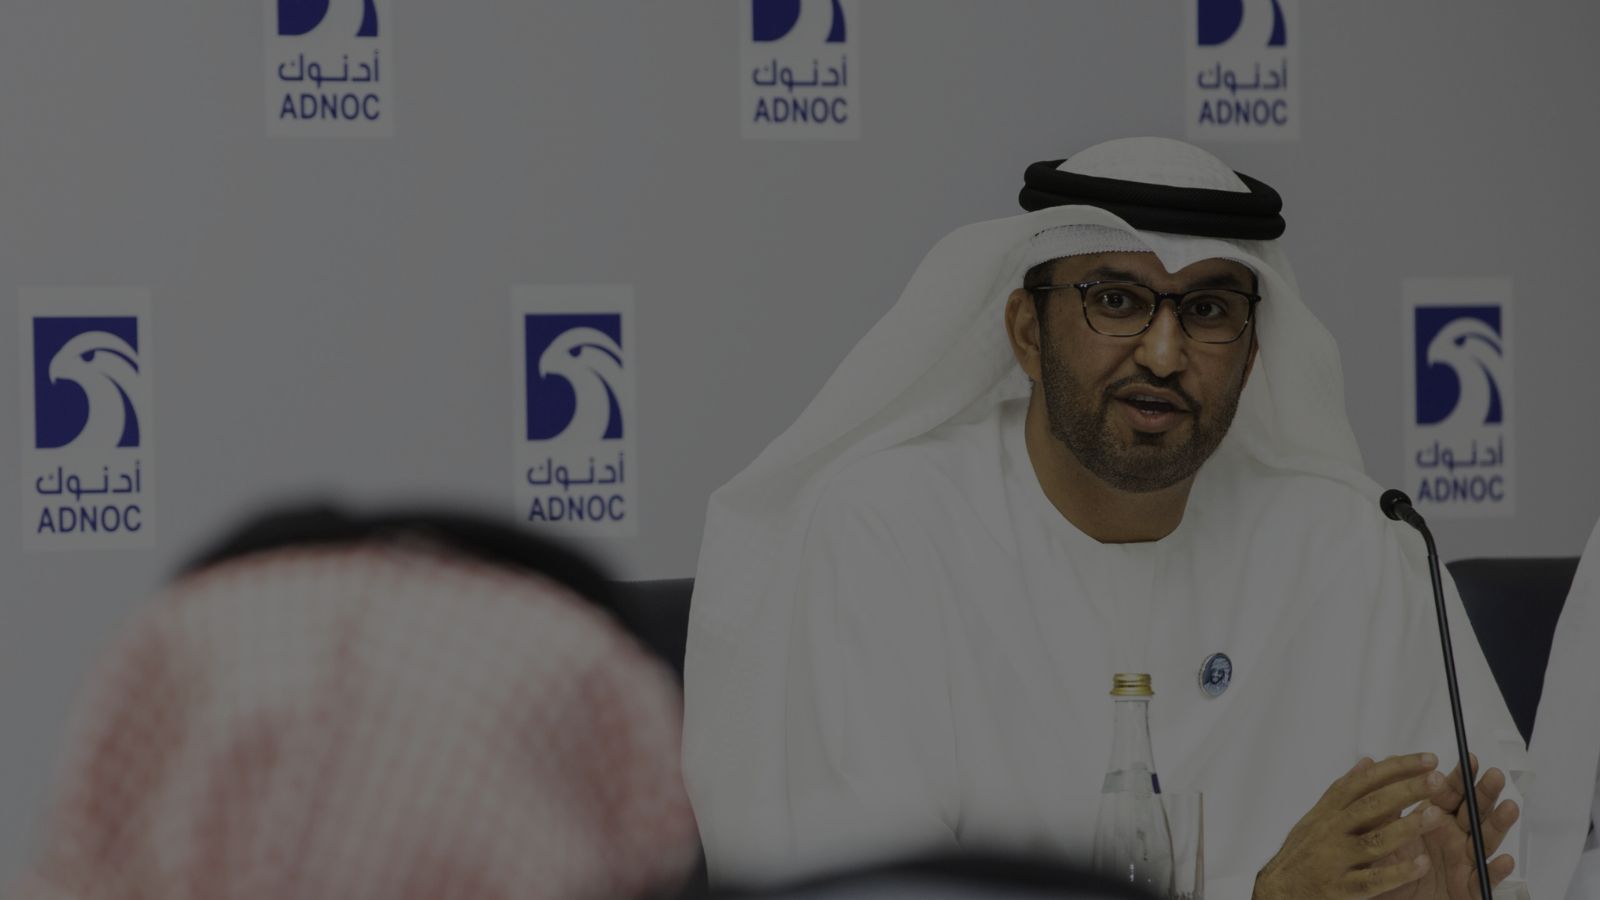 UAE’s Adnoc considered dropping “oil” to project a greener image ahead of Cop28.